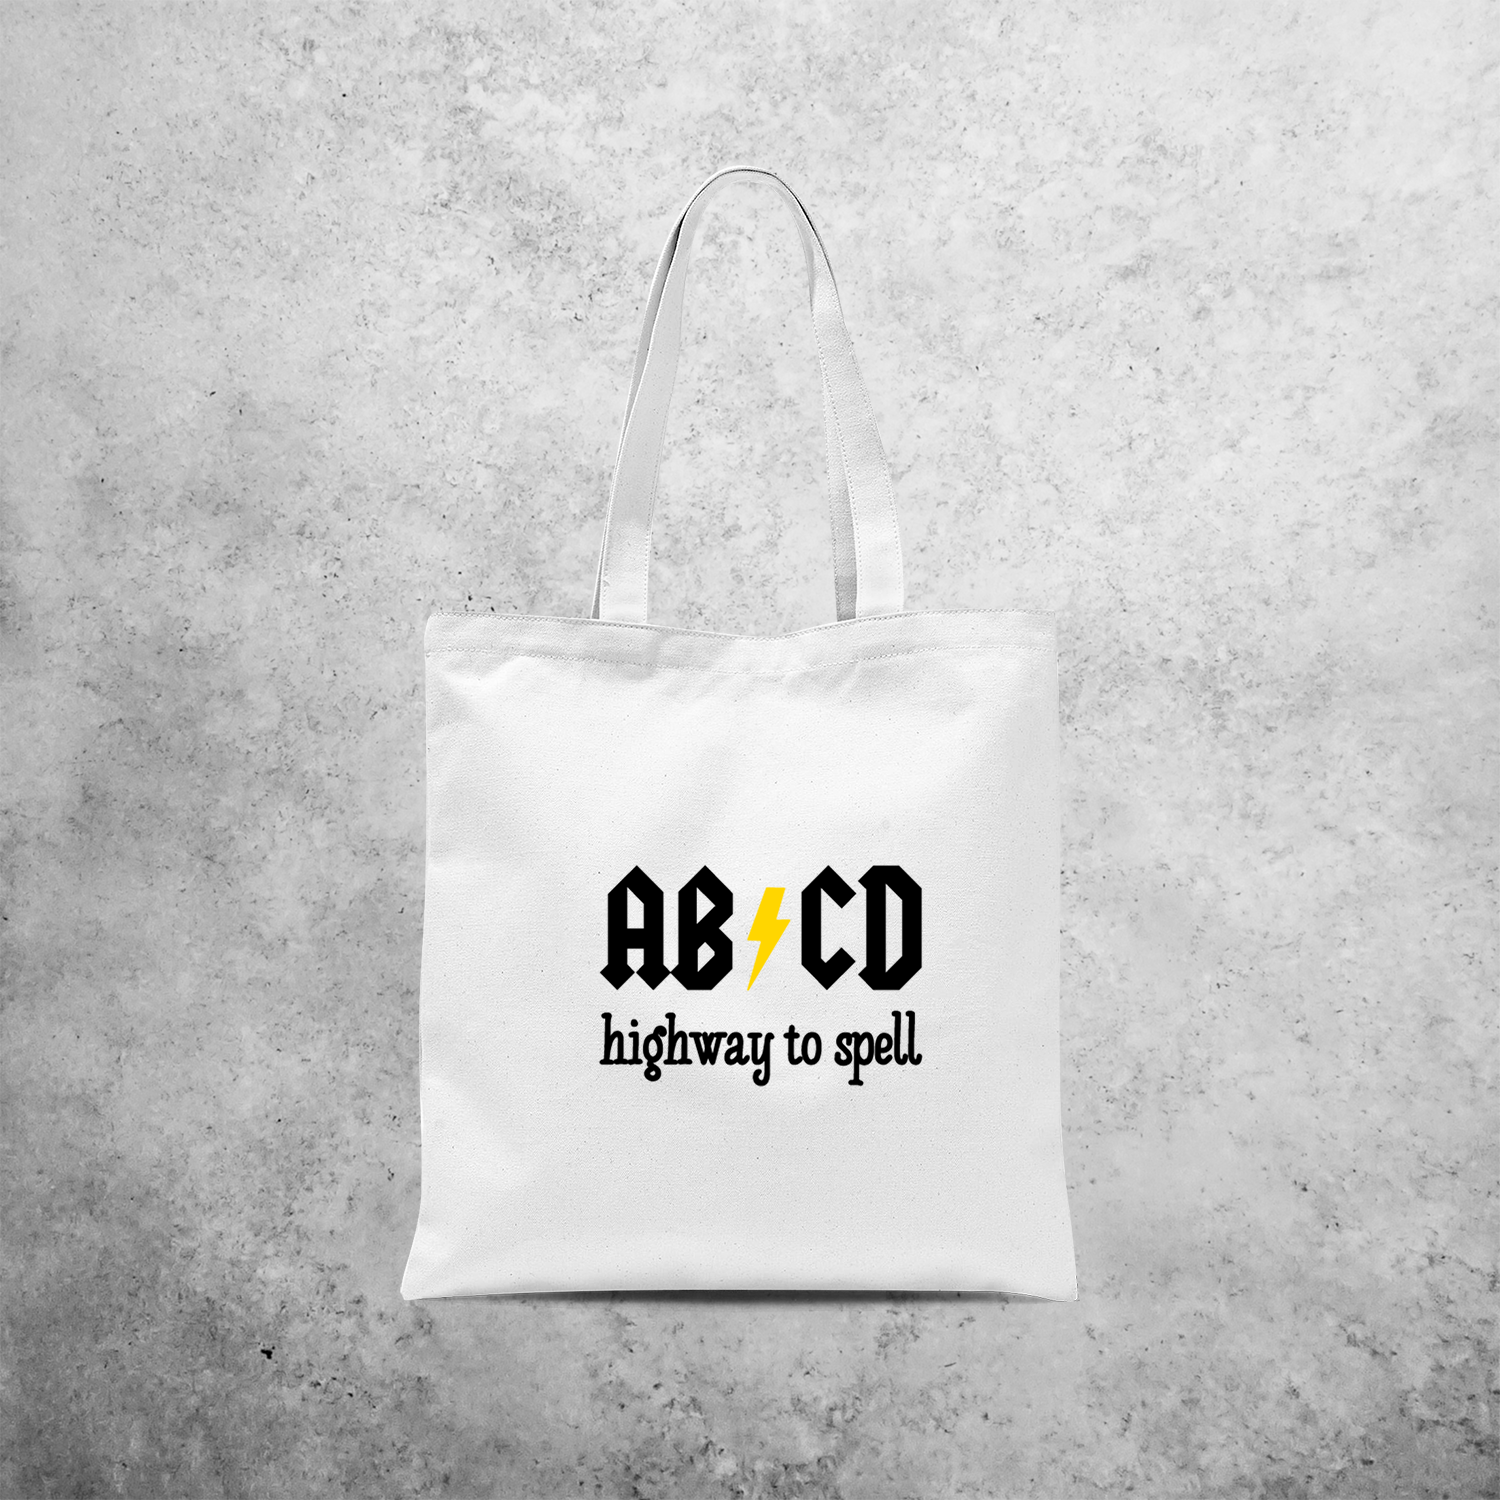 'ABCD - Highway to spell' tote bag